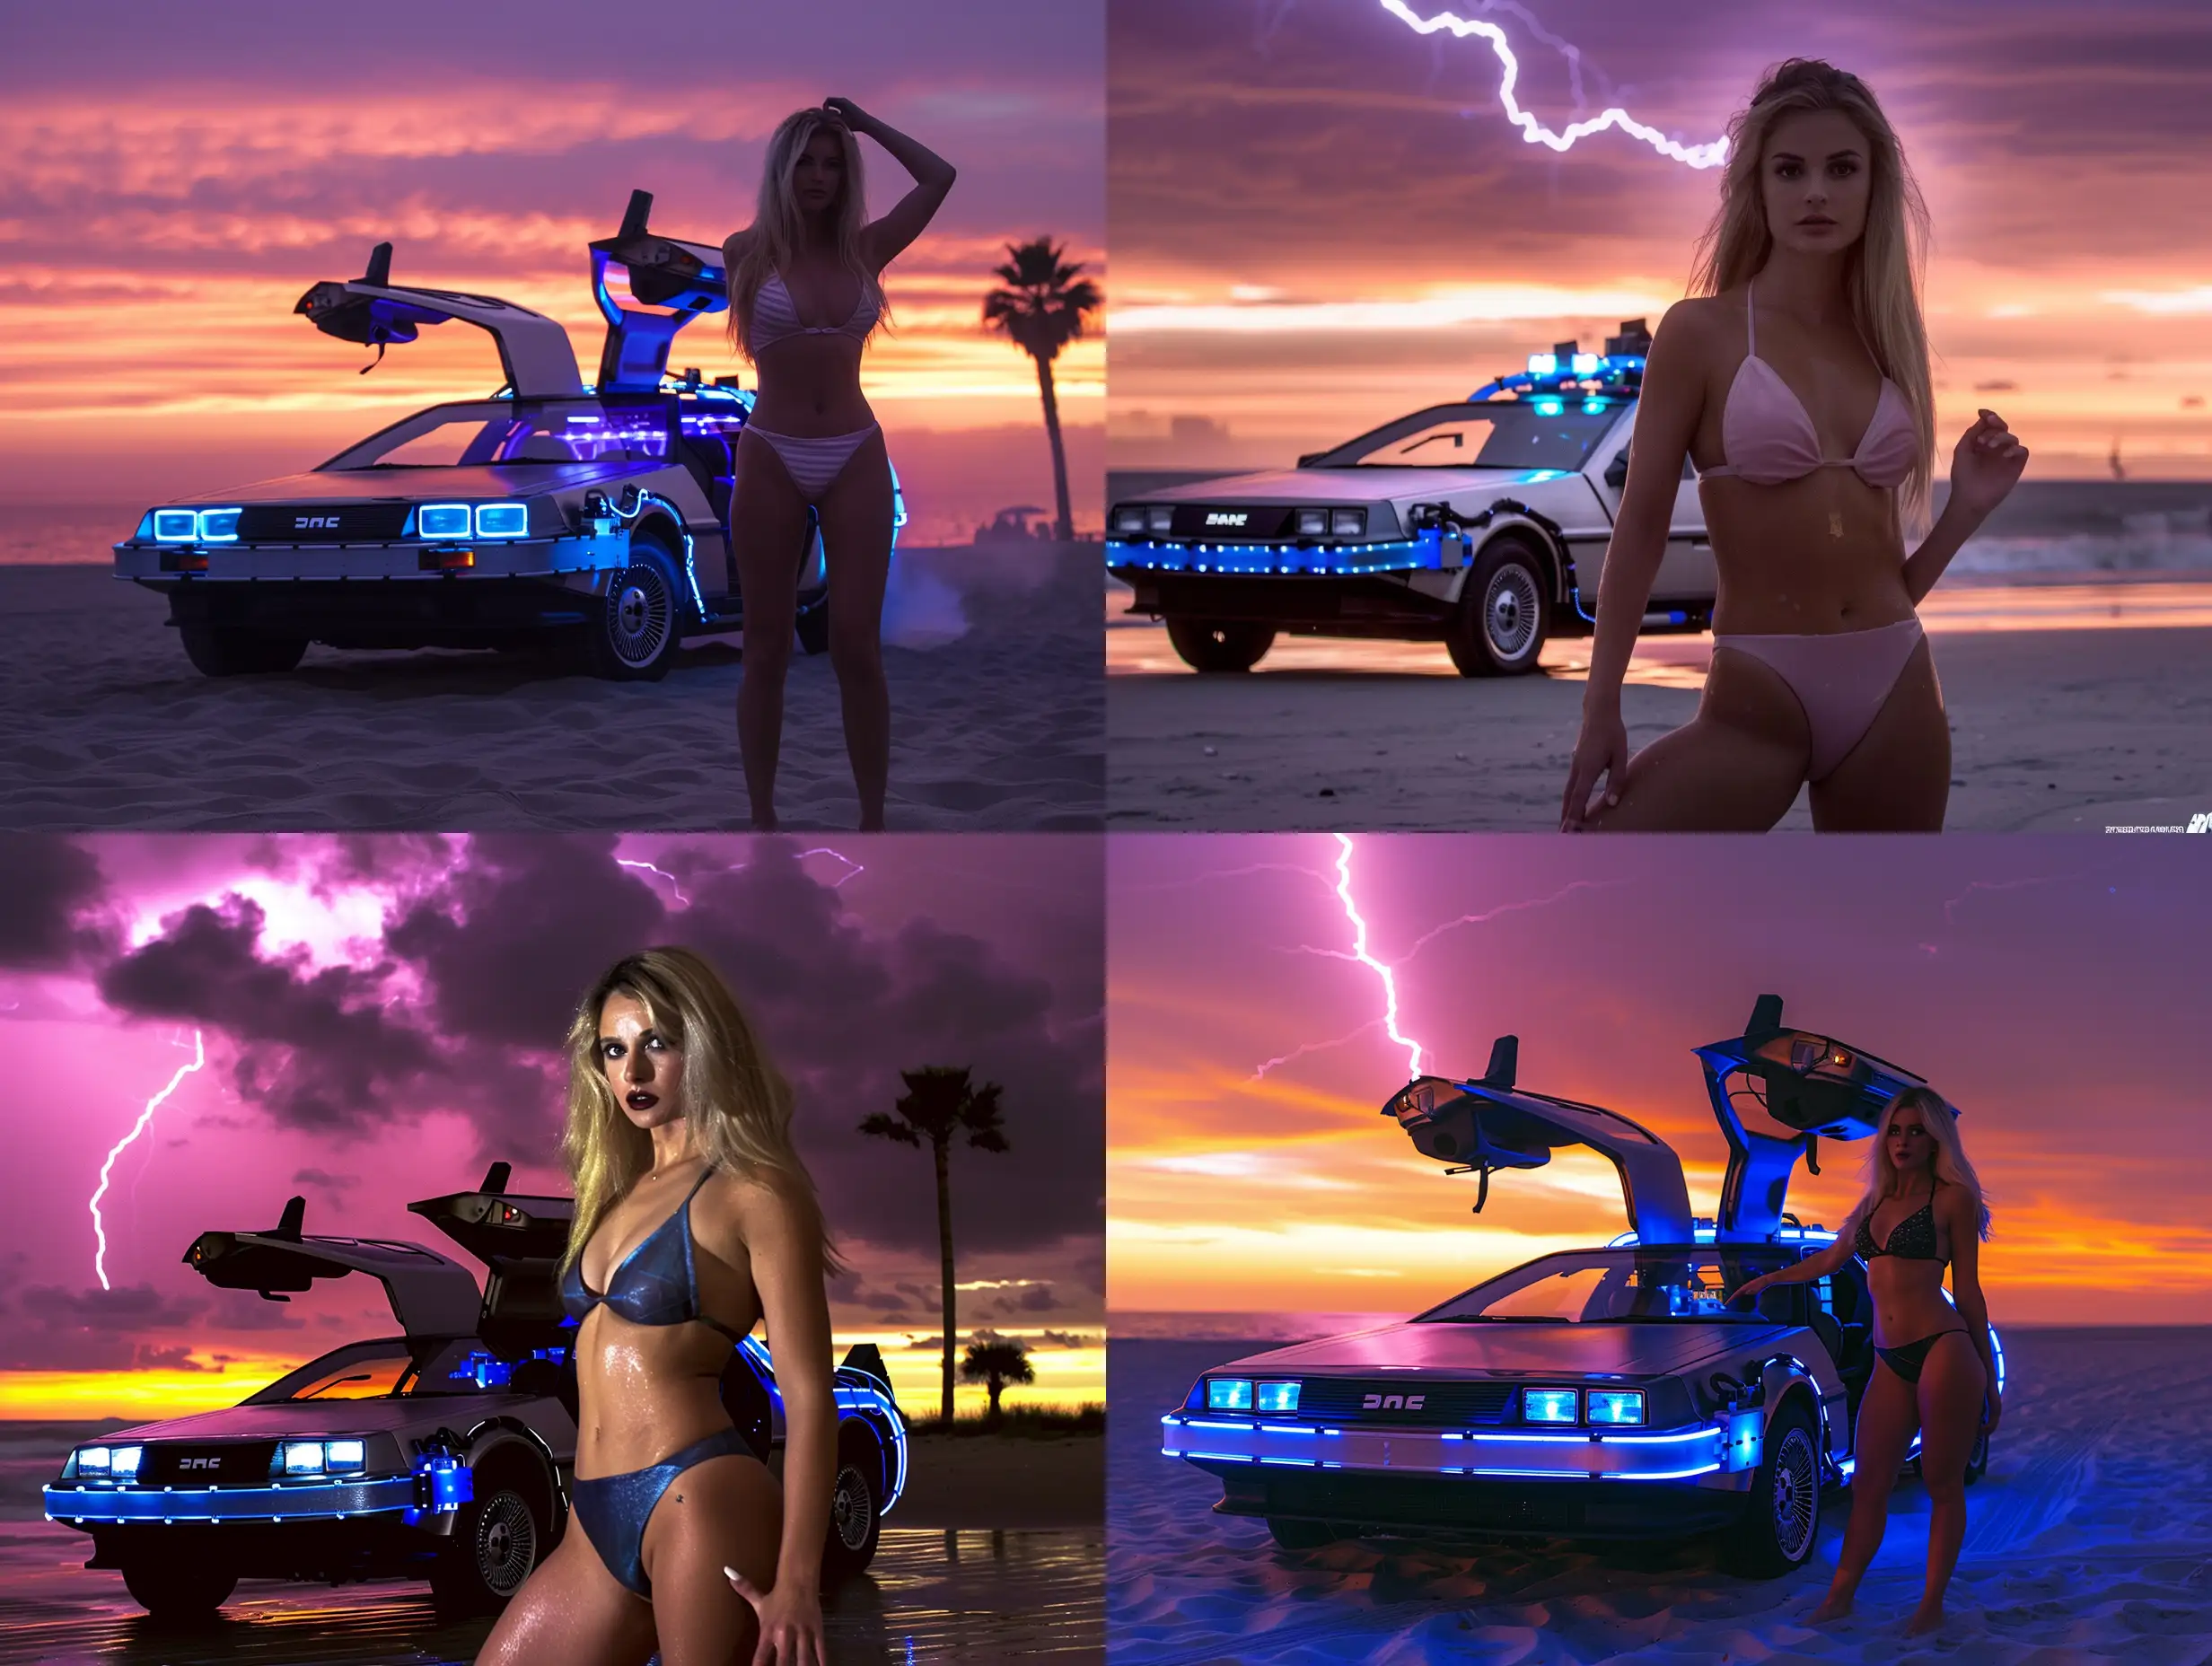 Blonde-Swimsuit-Model-Posing-with-Back-to-the-Future-DeLorean-on-Sunset-Beach